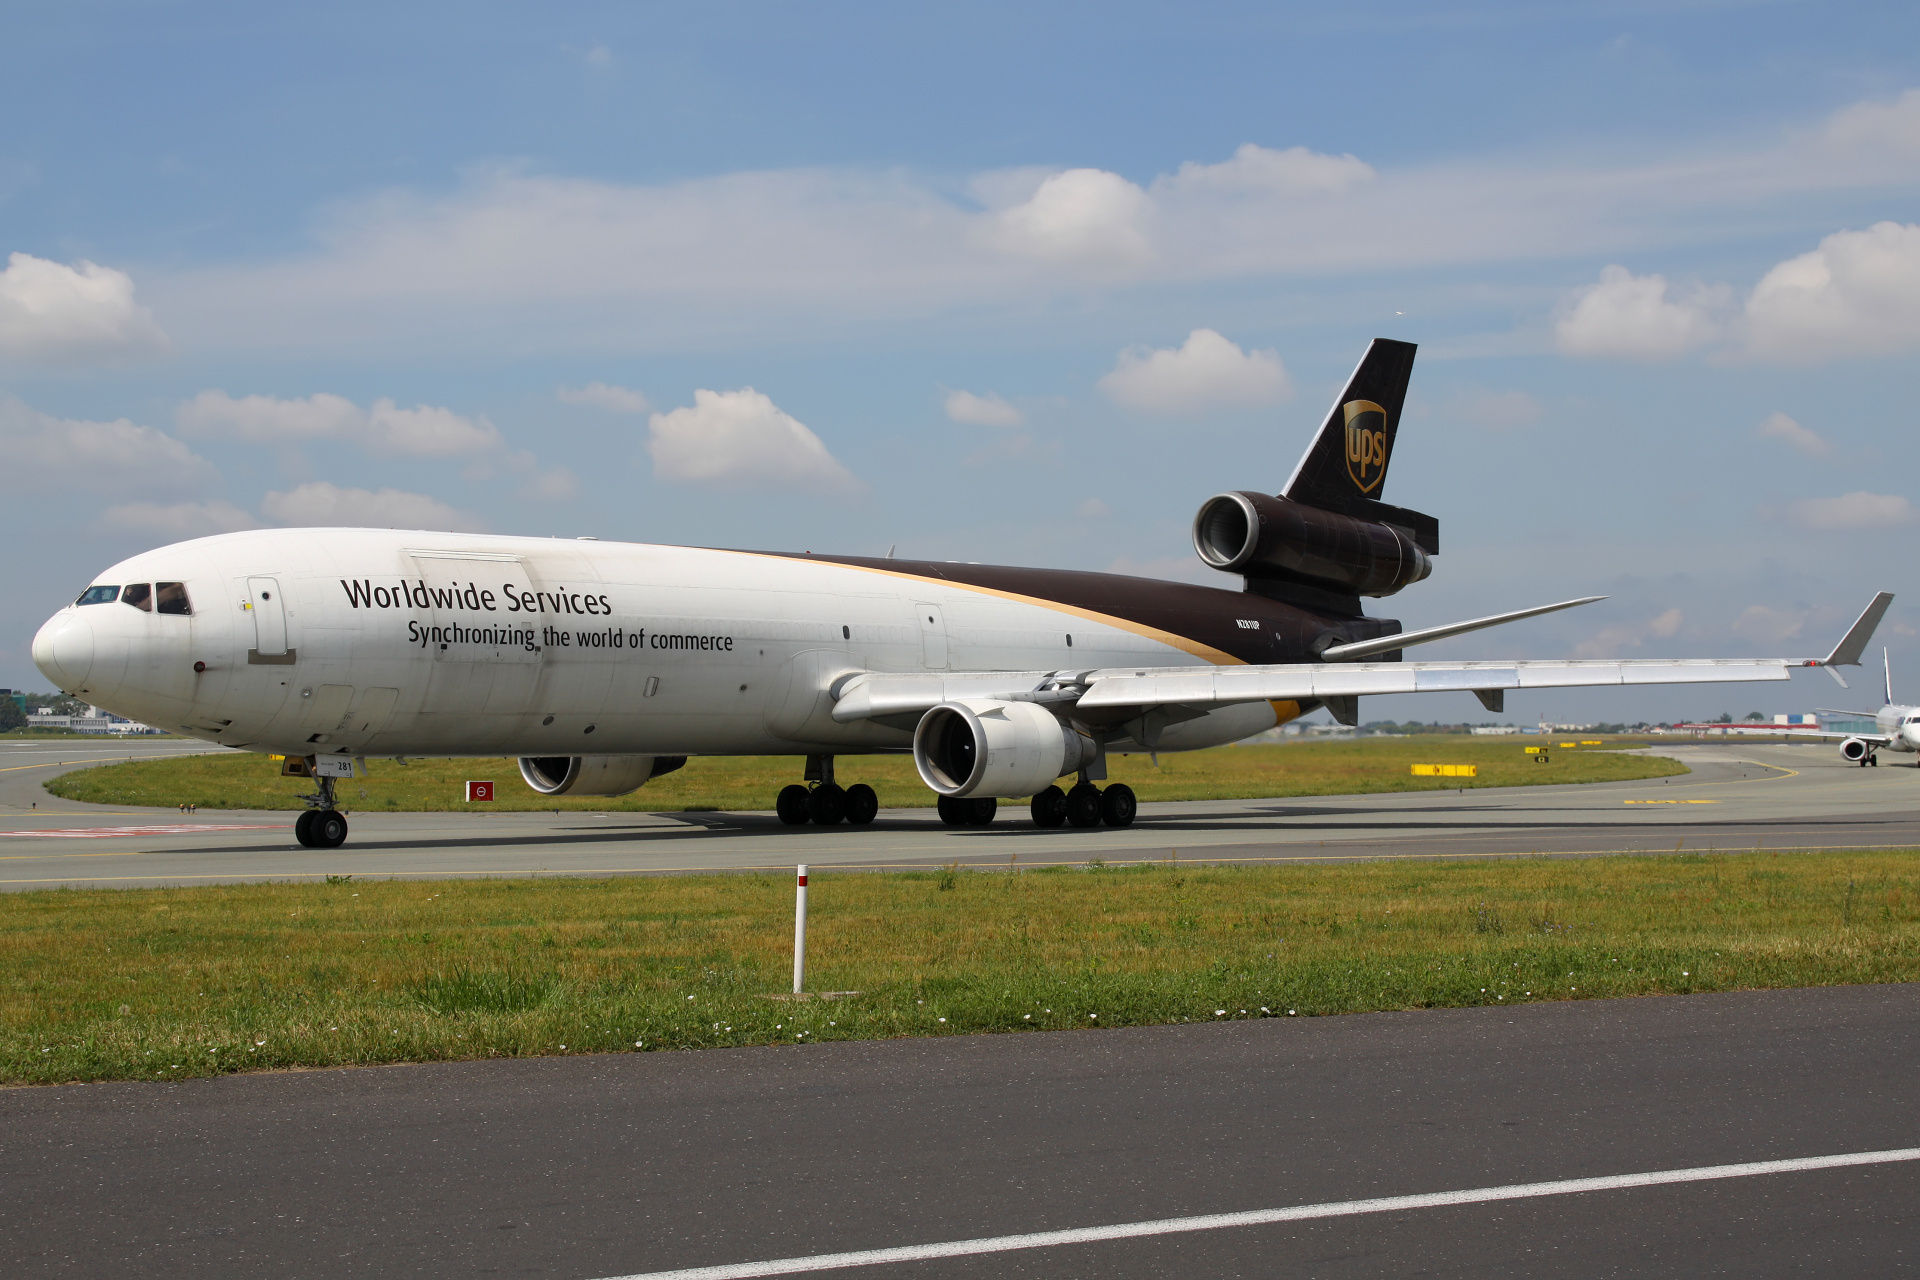 N281UP, United Parcel Service (UPS) Airlines (Aircraft » EPWA Spotting » McDonnell Douglas MD-11F)